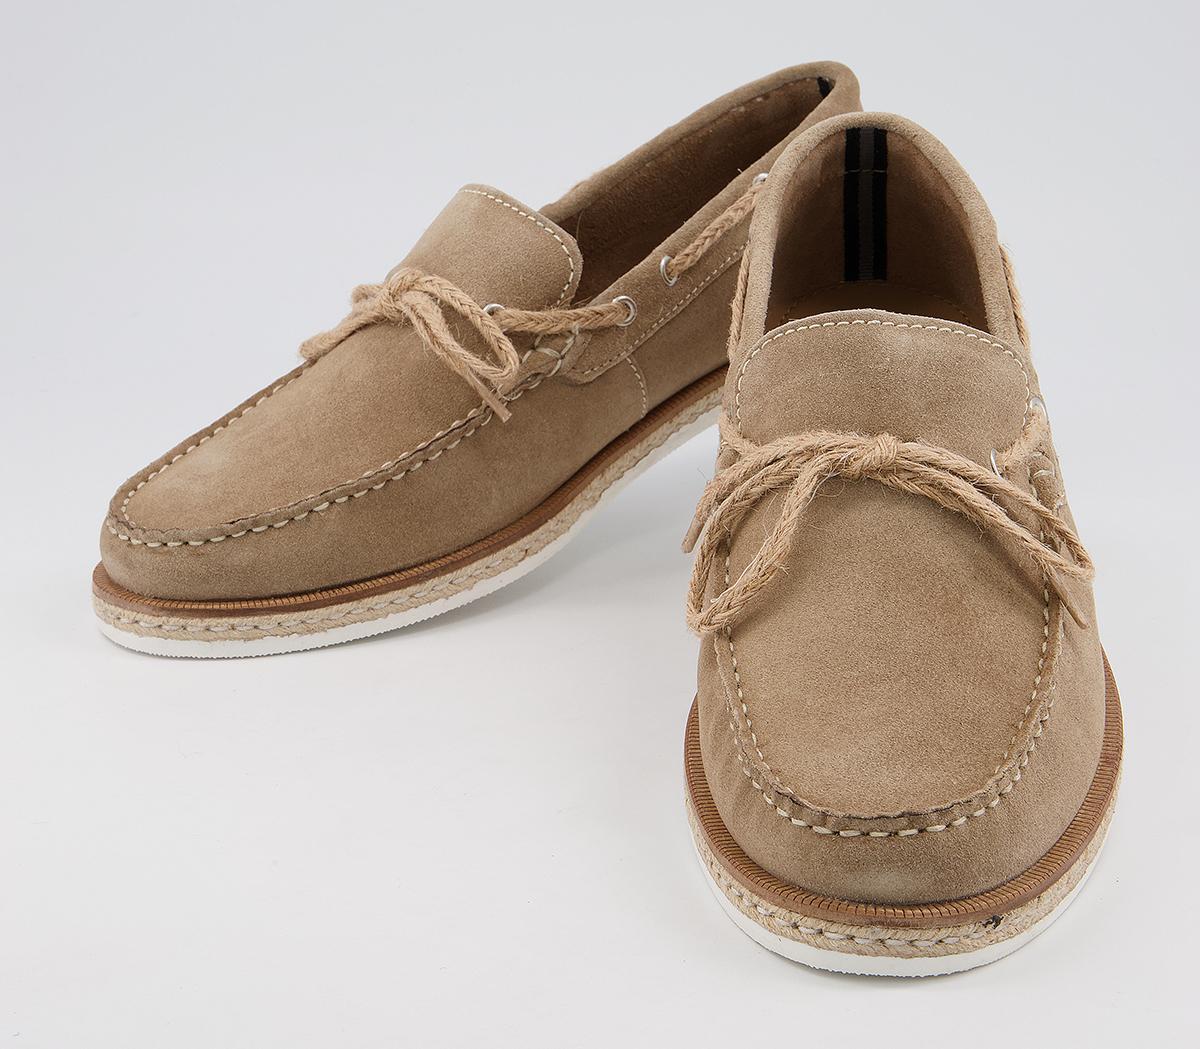 Walk London Bahama Lace Loafers Stone Suede - Casual